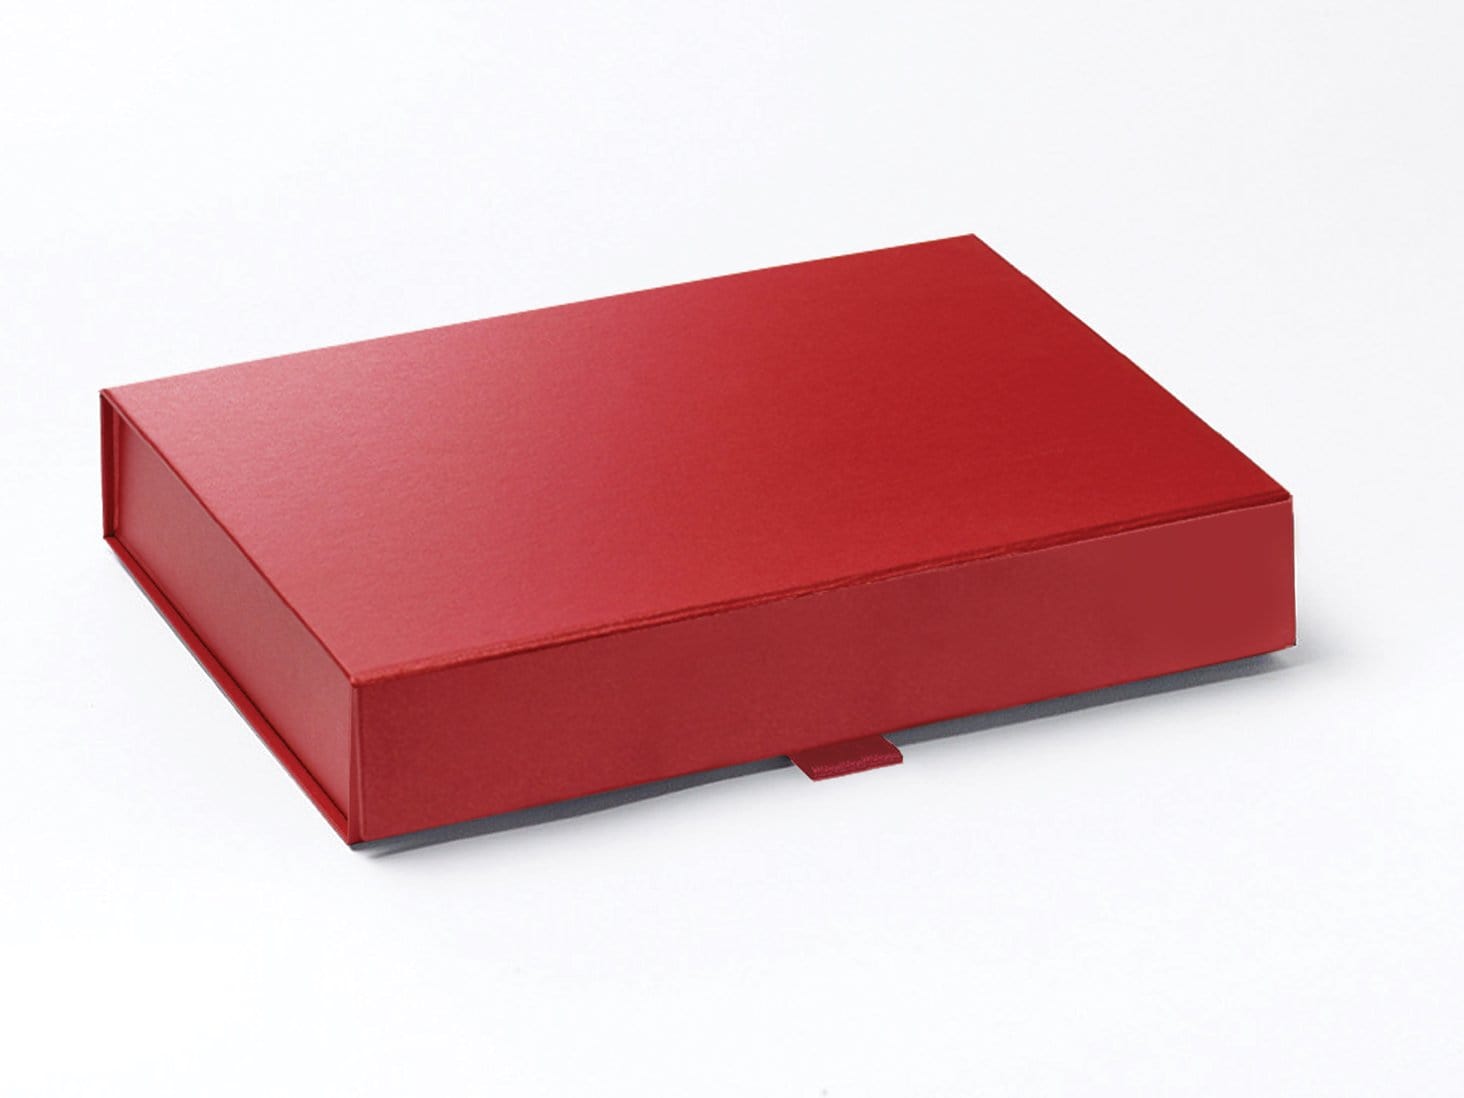 A5 Shallow Red Pearl Folding Gift Box with Magnetic Snap Shut Closure